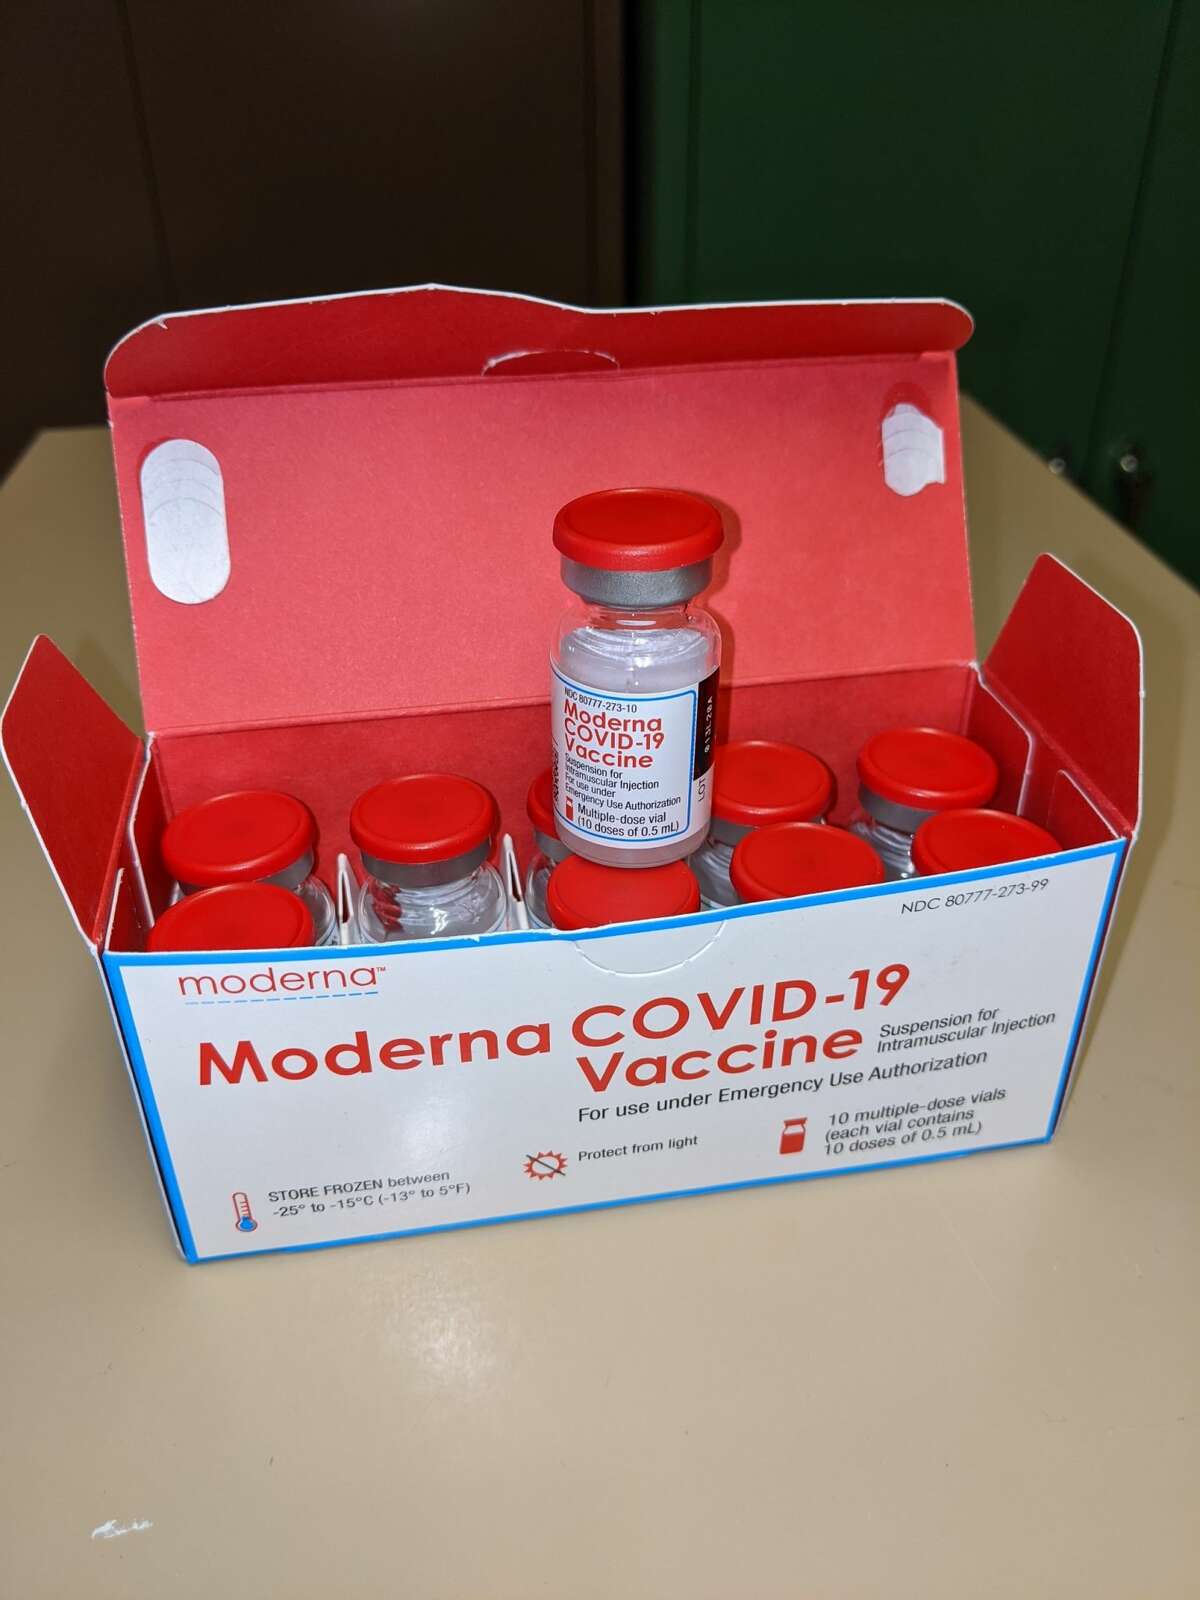 The Moderna COVID-19 vaccine is being distributed to pharmacies and health departments around the Capital Region. The Pfizer vaccine is being sent to a state-run mass-vaccination site at the University at Albany.